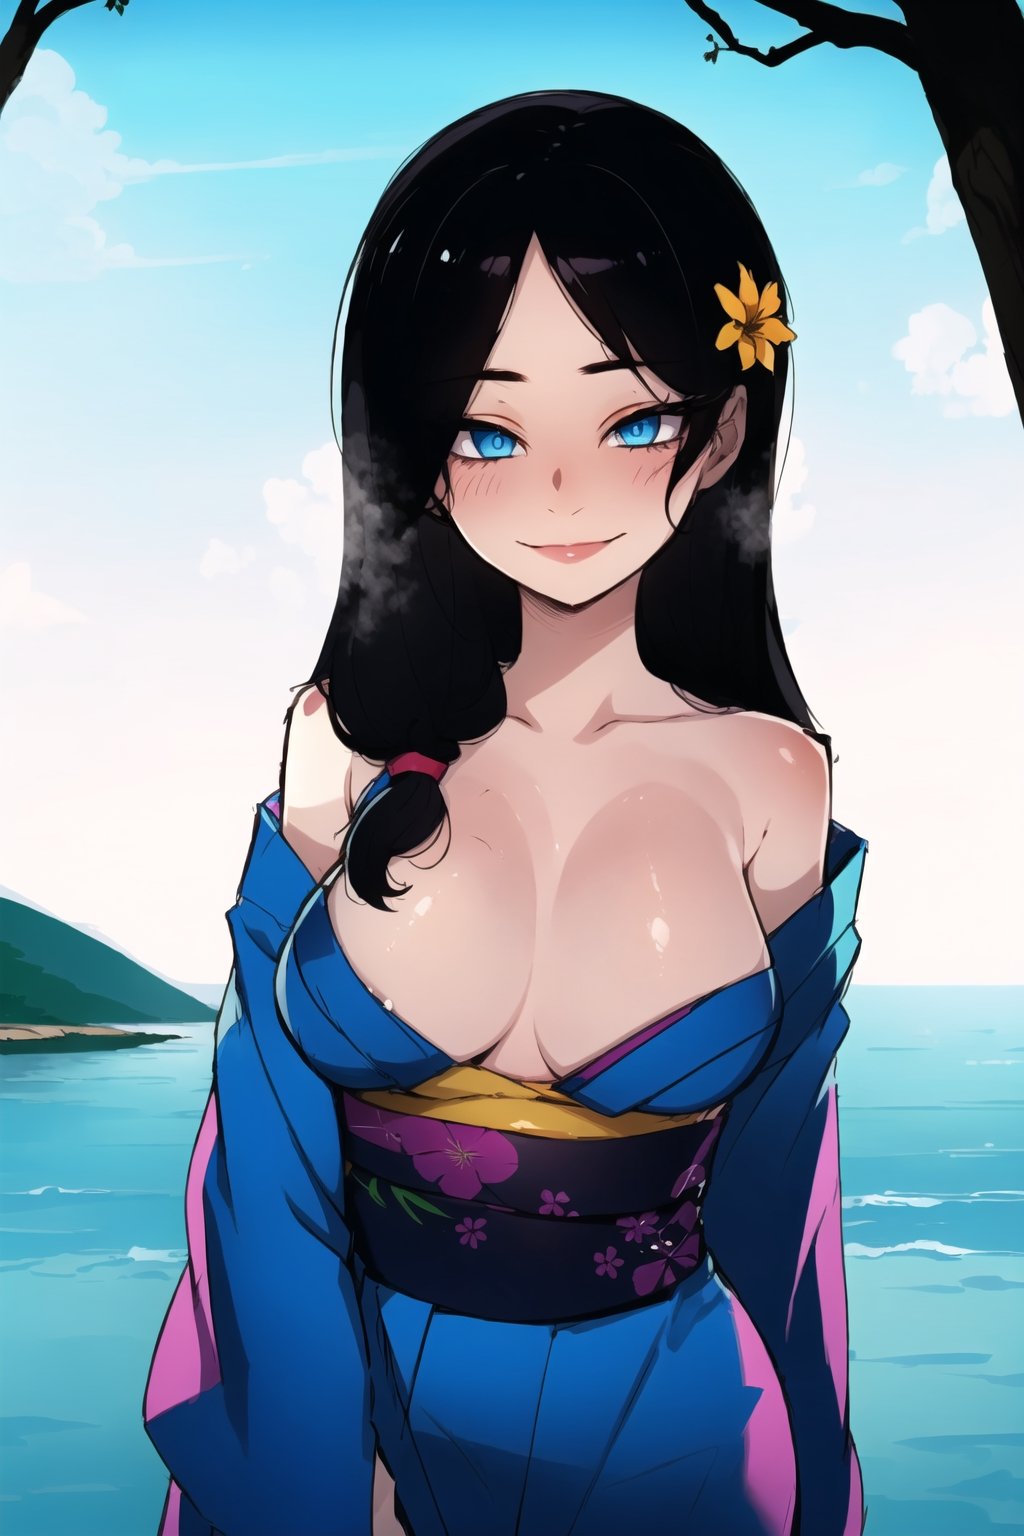 1girl(skinny body, young, 20 years old, long black hair, blue eyes, wearing yukata, big breasts), staring at you seductively with a smile on her face, upper body, background(day, outdoor, sky, sun, ocean, flowers, trees) (masterpiece, highres, high quality:1.2), ambient occlusion, outstanding colors, low saturation,High detailed, Detailedface, Dreamscape,ratatatat74 style